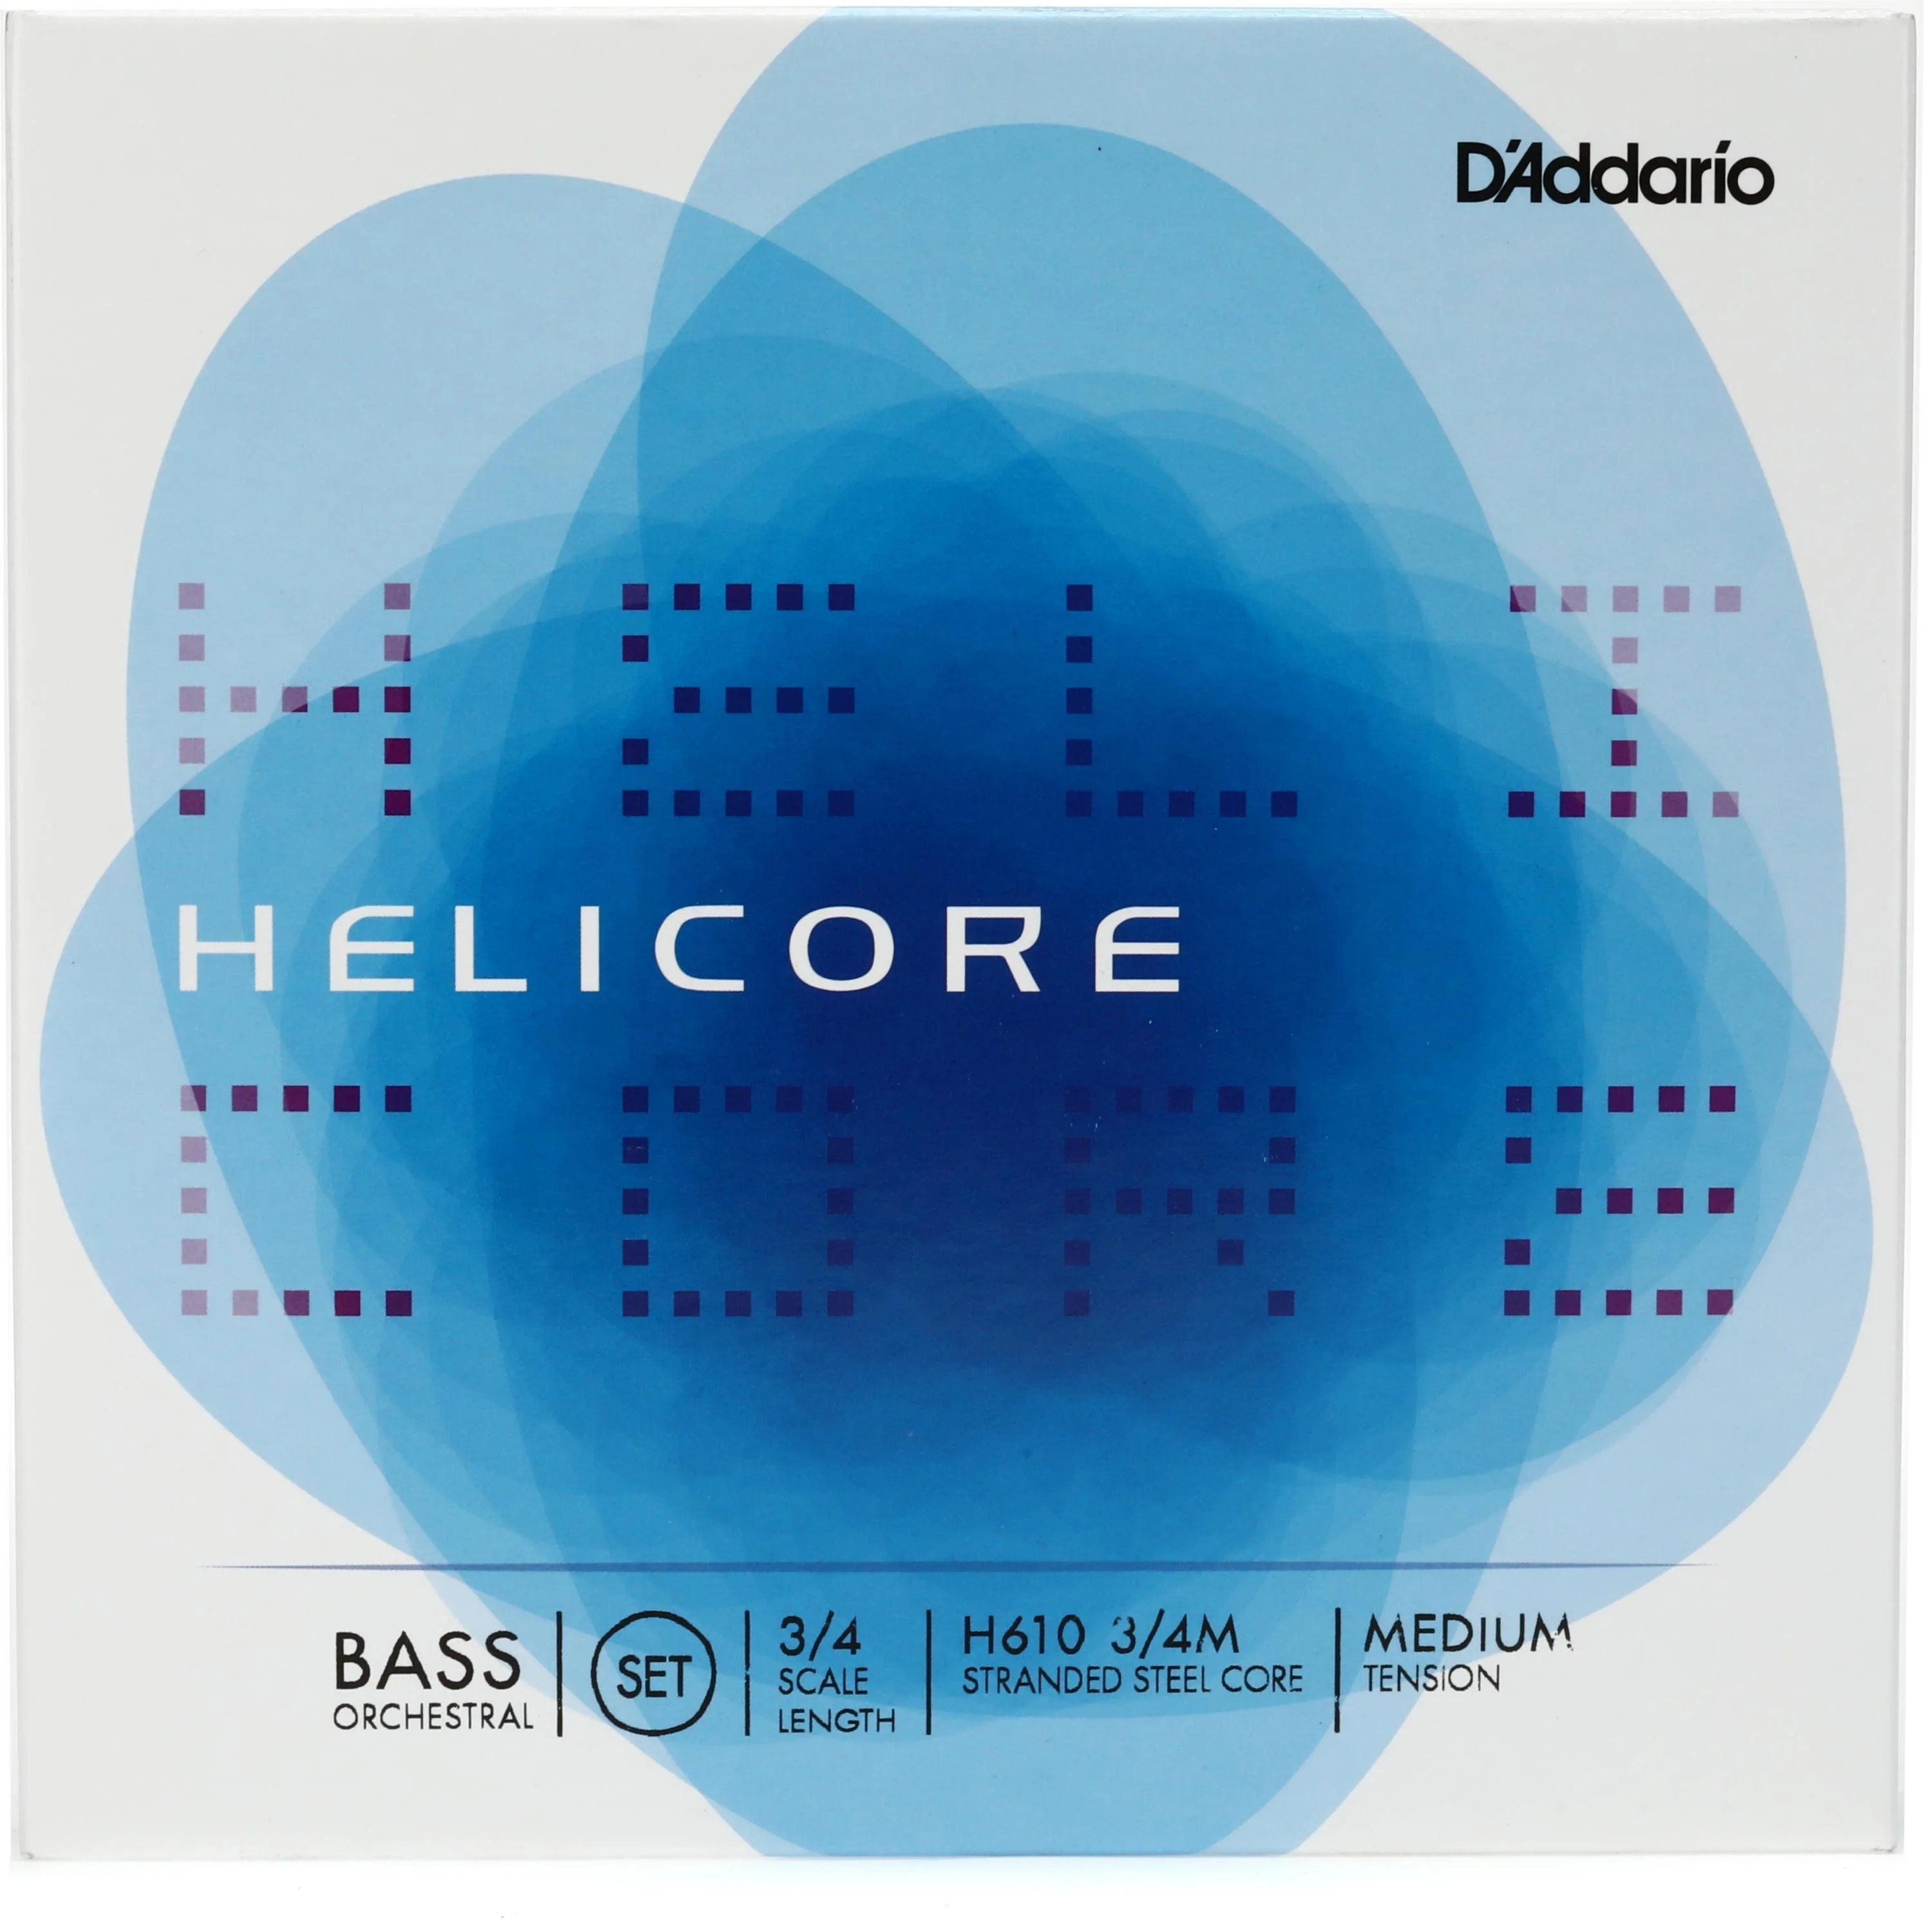 D'Addario - Helicore | Double Bass